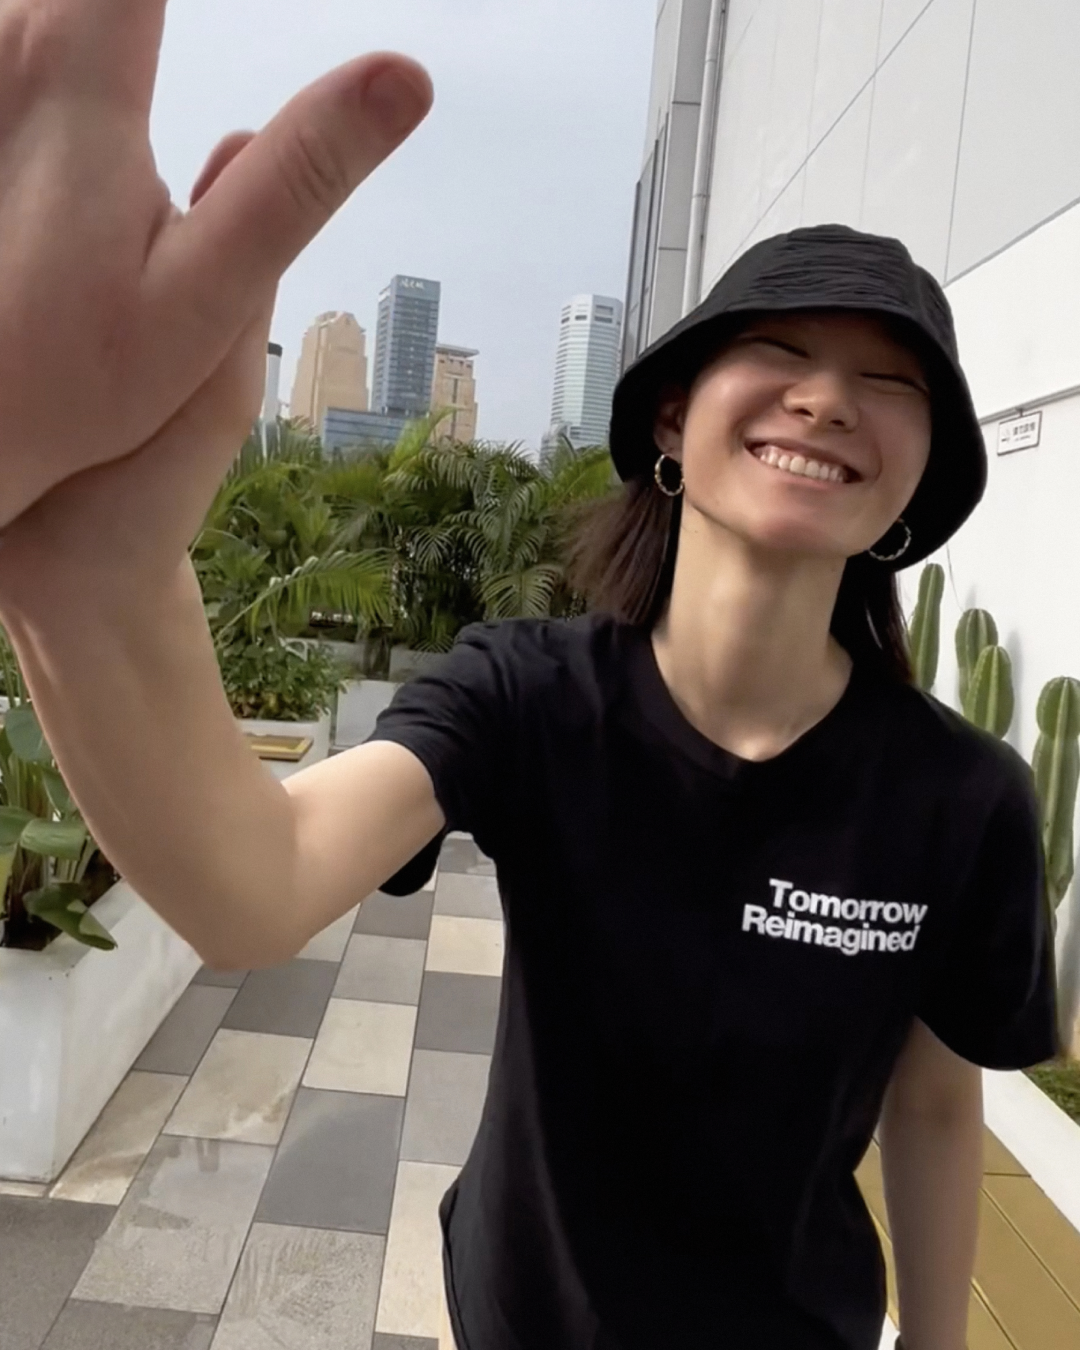 ZURU team member standing outside smiling to camera, wearing black bucket hat and black "Tomorrow Reimagined" t-shirt